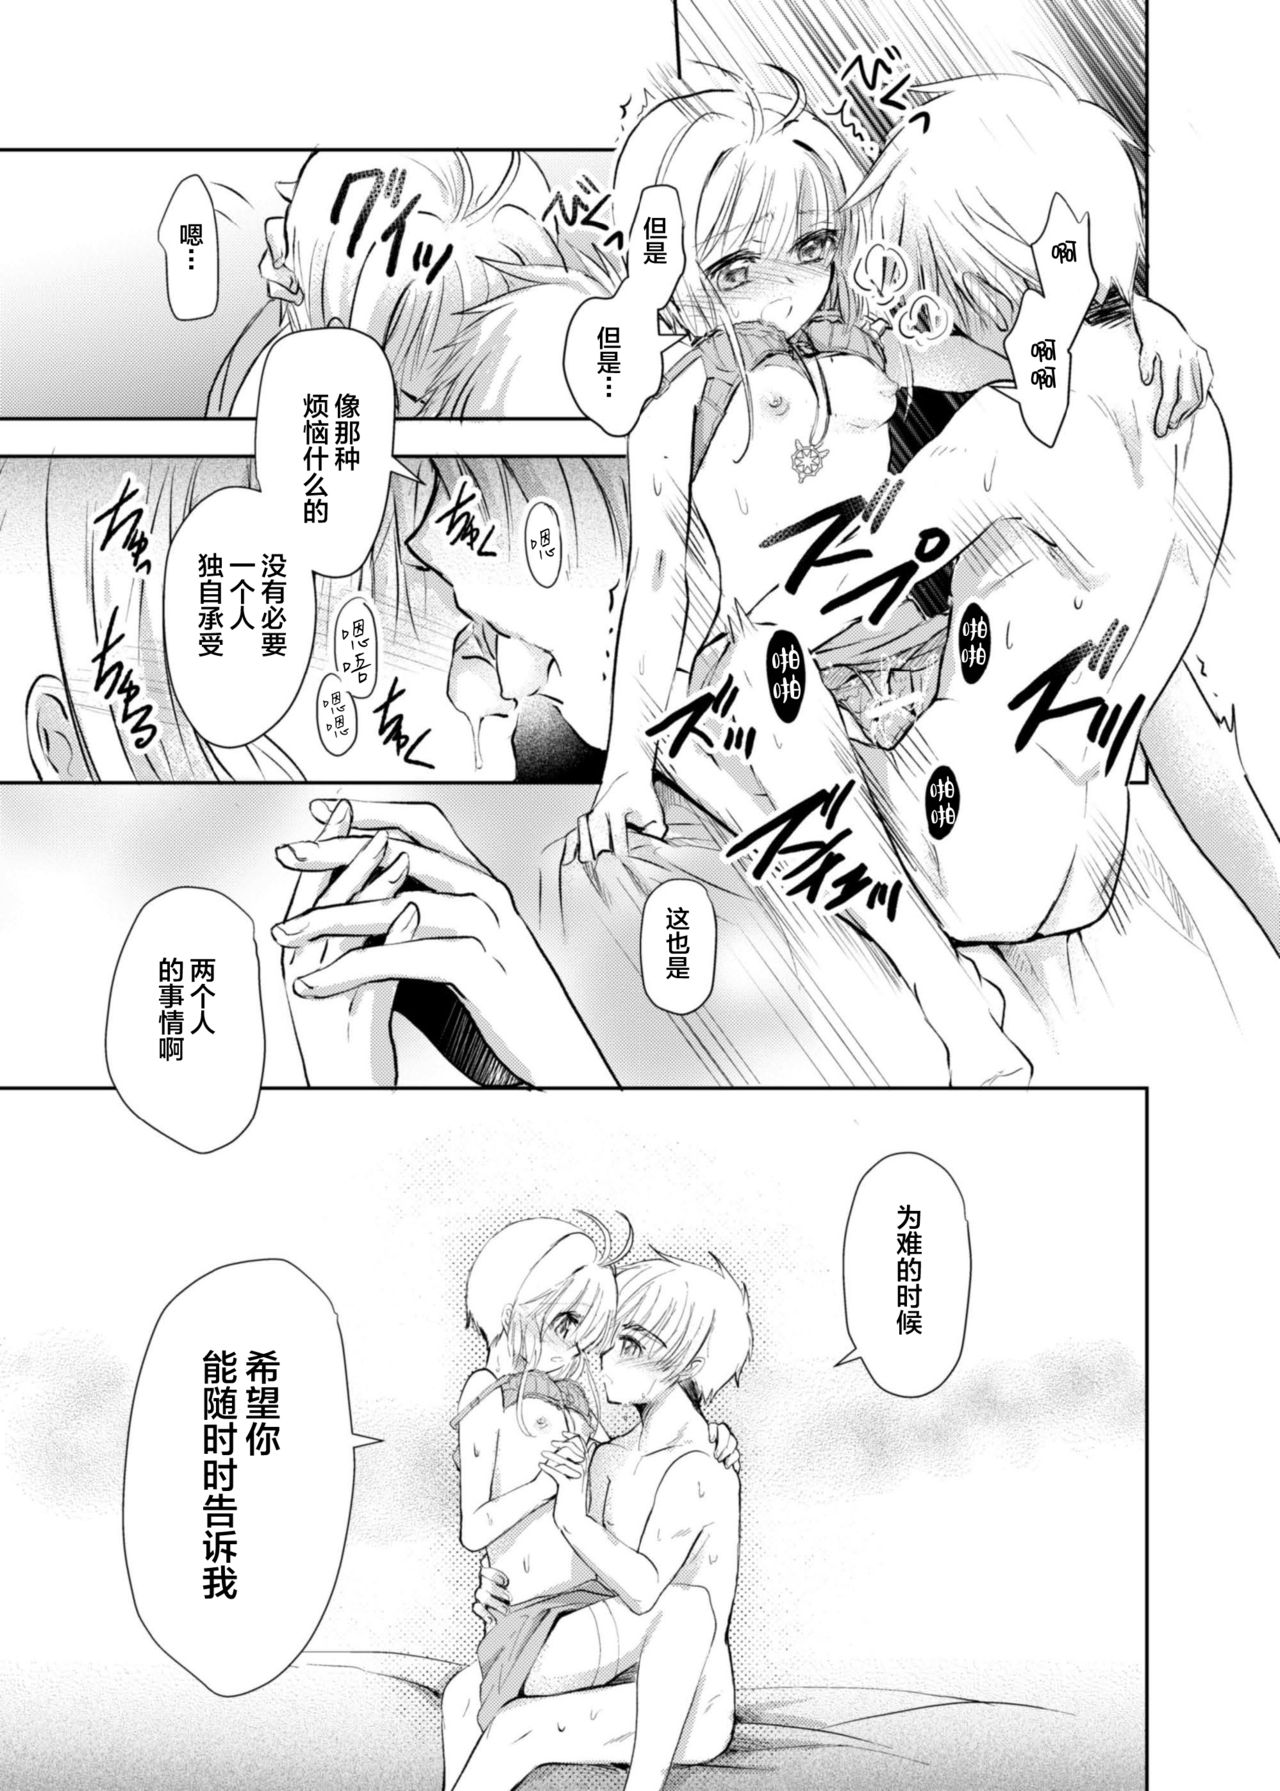 [Maple of Forest (Kaede Sago)] Give and Take (Cardcaptor Sakura) [Chinese] [新桥月白日语社] [Digital] page 28 full